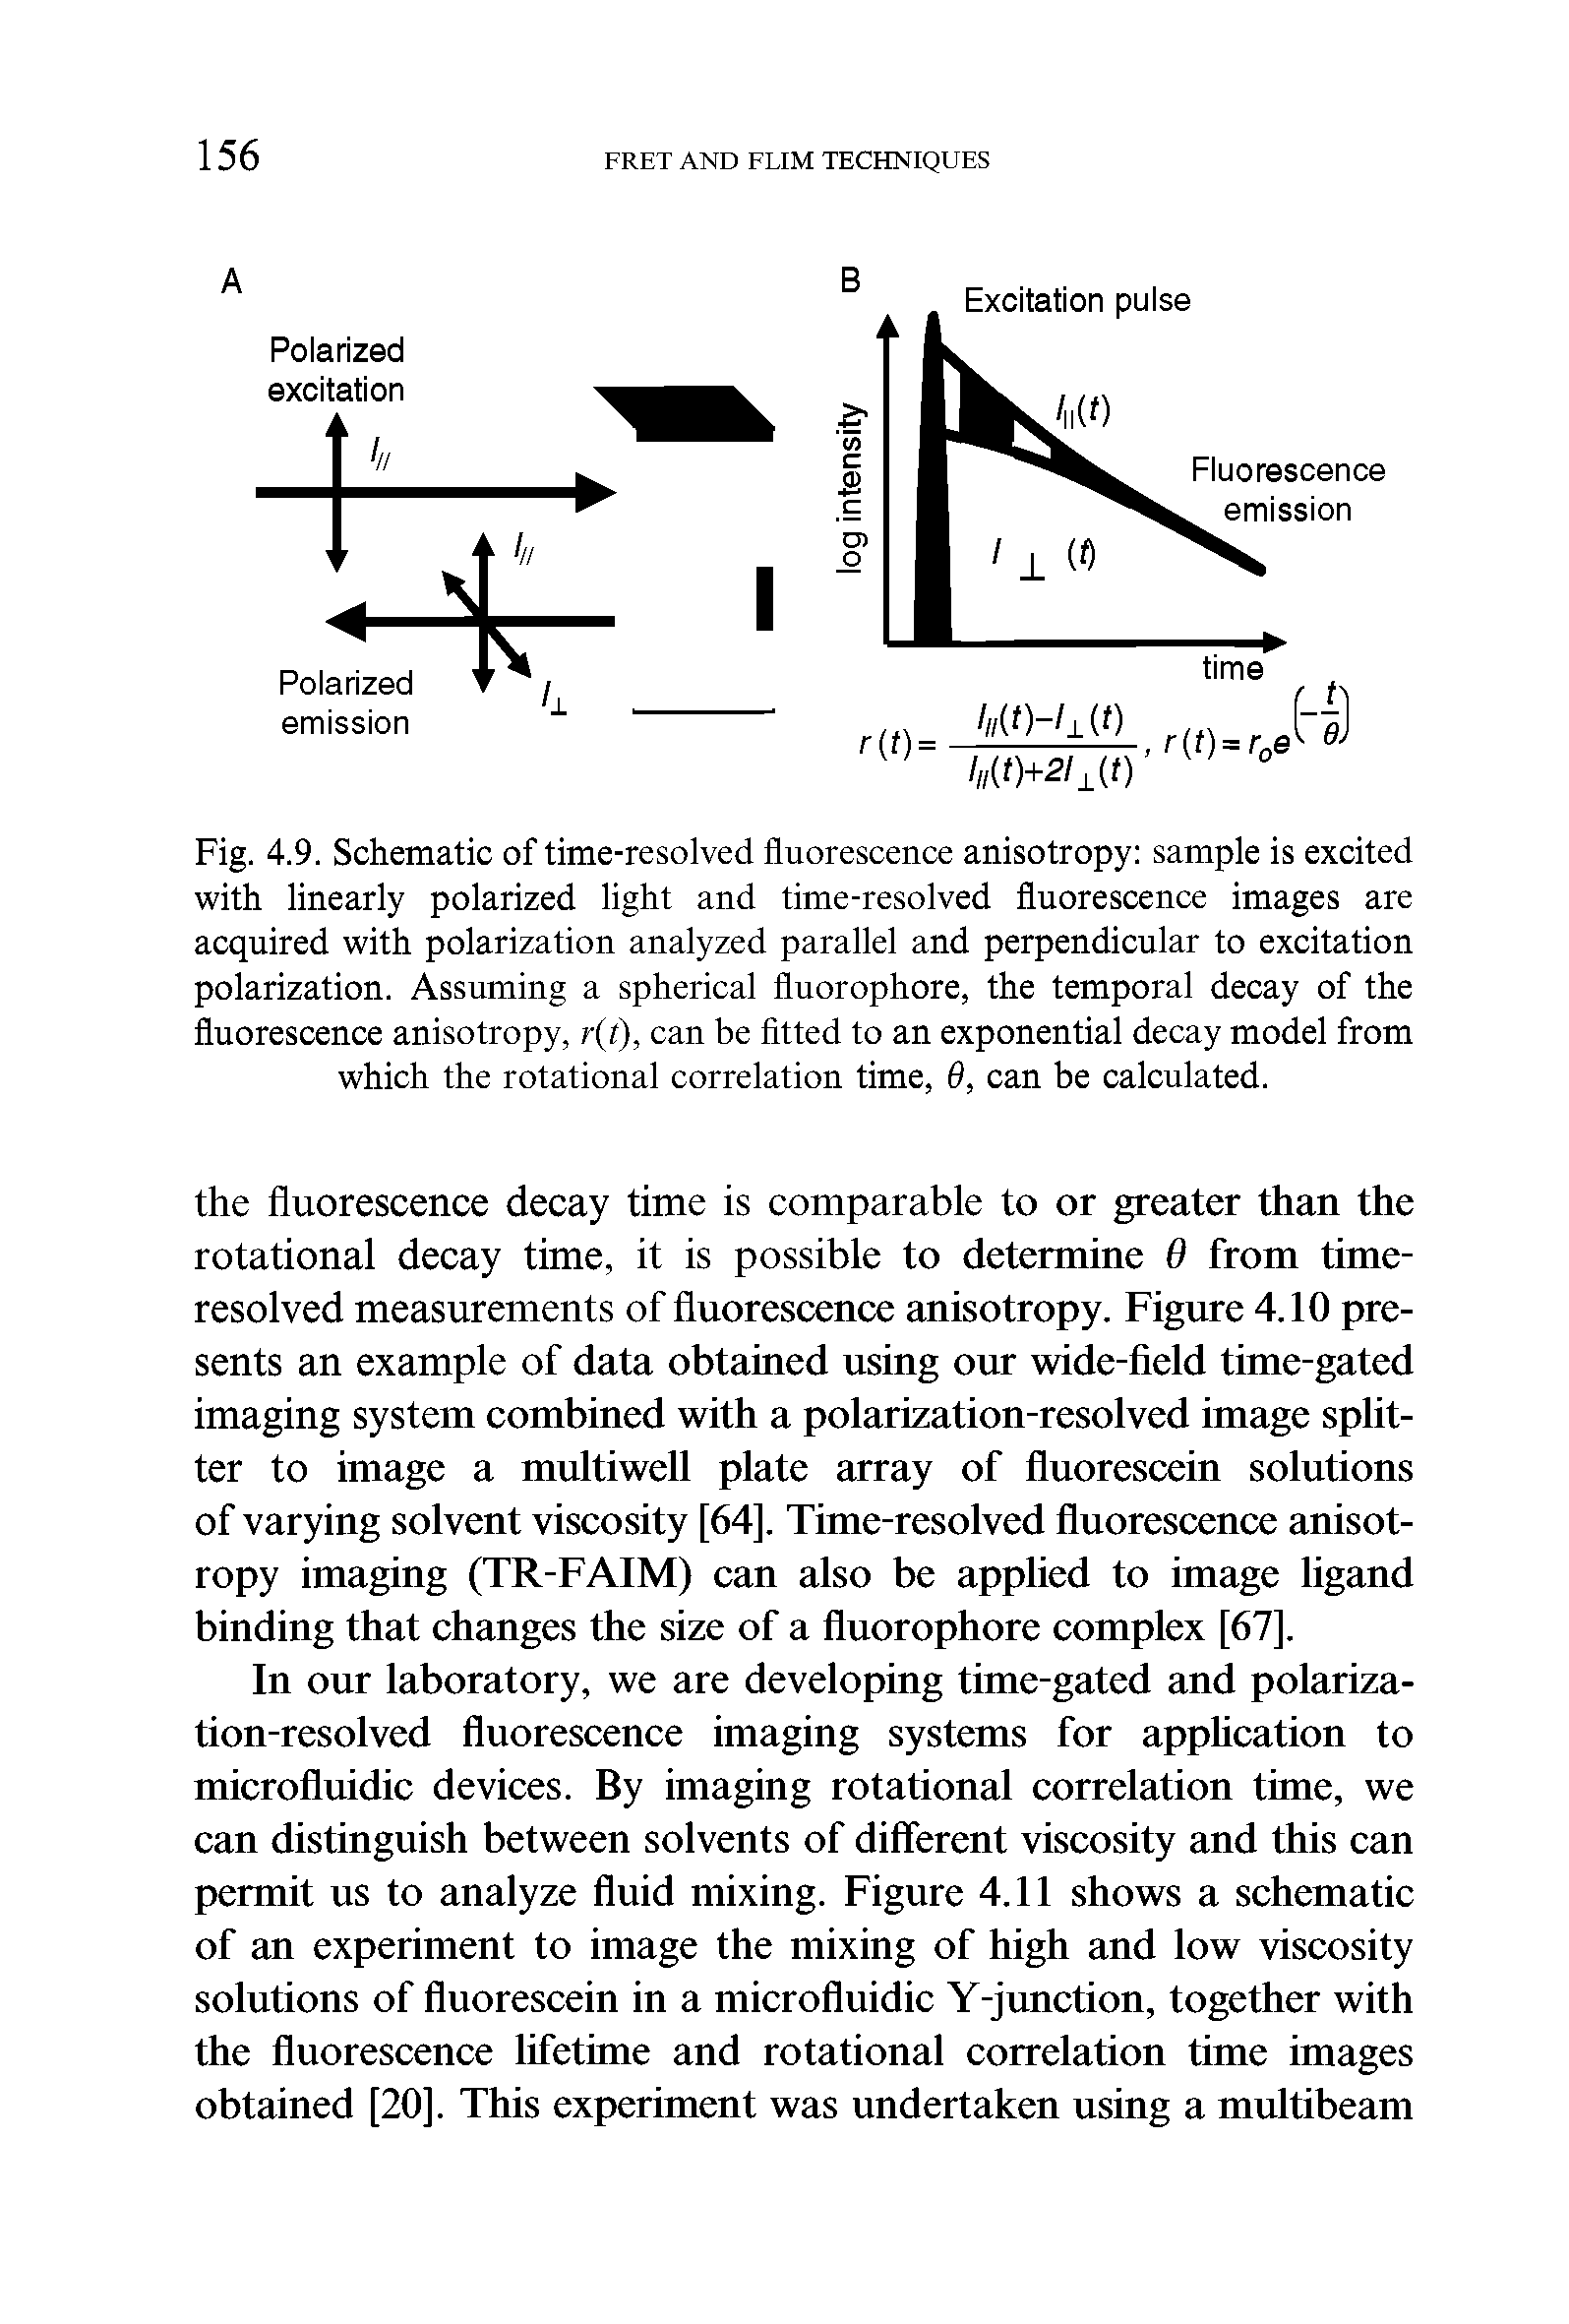 Fig. 4.9. Schematic of time-resolved fluorescence anisotropy sample is excited with linearly polarized light and time-resolved fluorescence images are acquired with polarization analyzed parallel and perpendicular to excitation polarization. Assuming a spherical fluorophore, the temporal decay of the fluorescence anisotropy, r(t), can be fitted to an exponential decay model from which the rotational correlation time, 6, can be calculated.